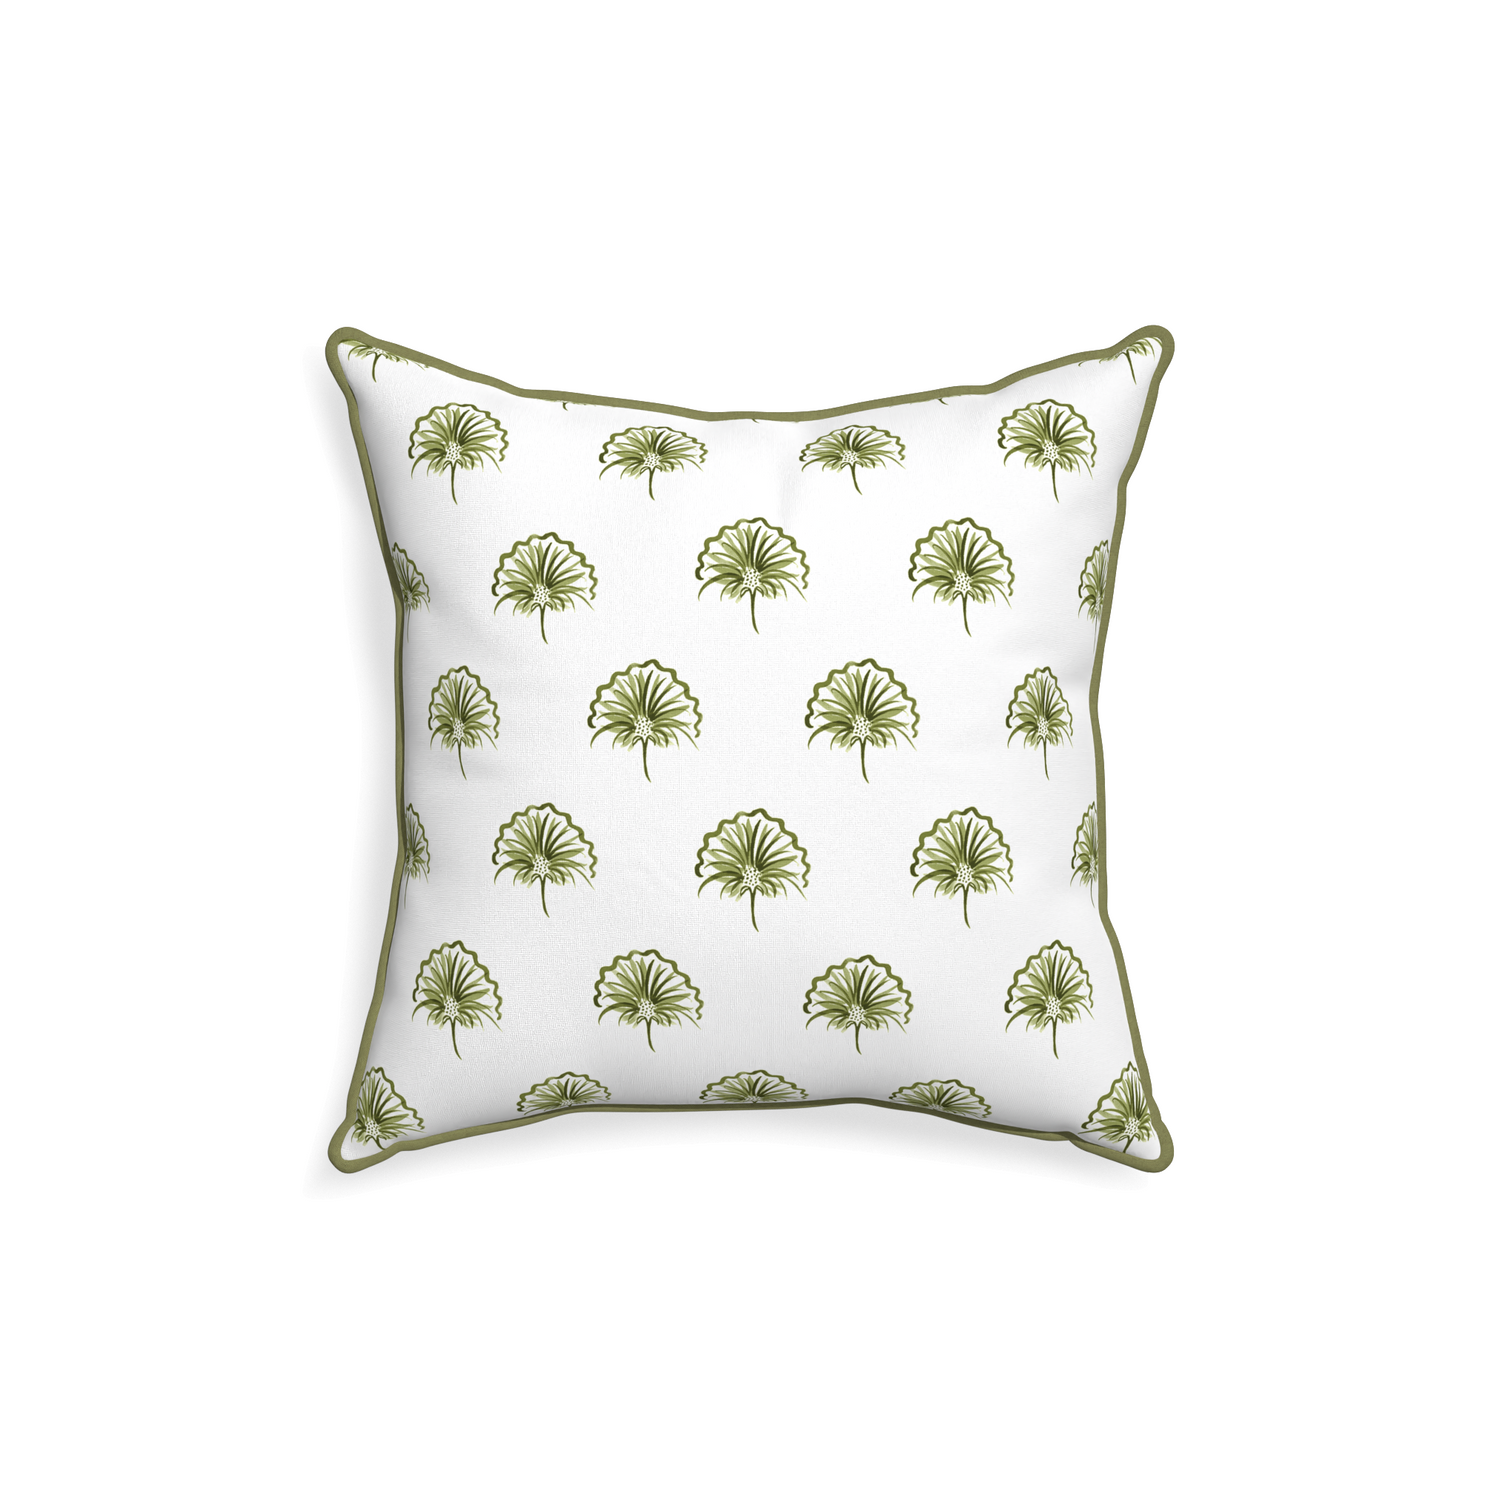 18-square penelope moss custom green floralpillow with moss piping on white background